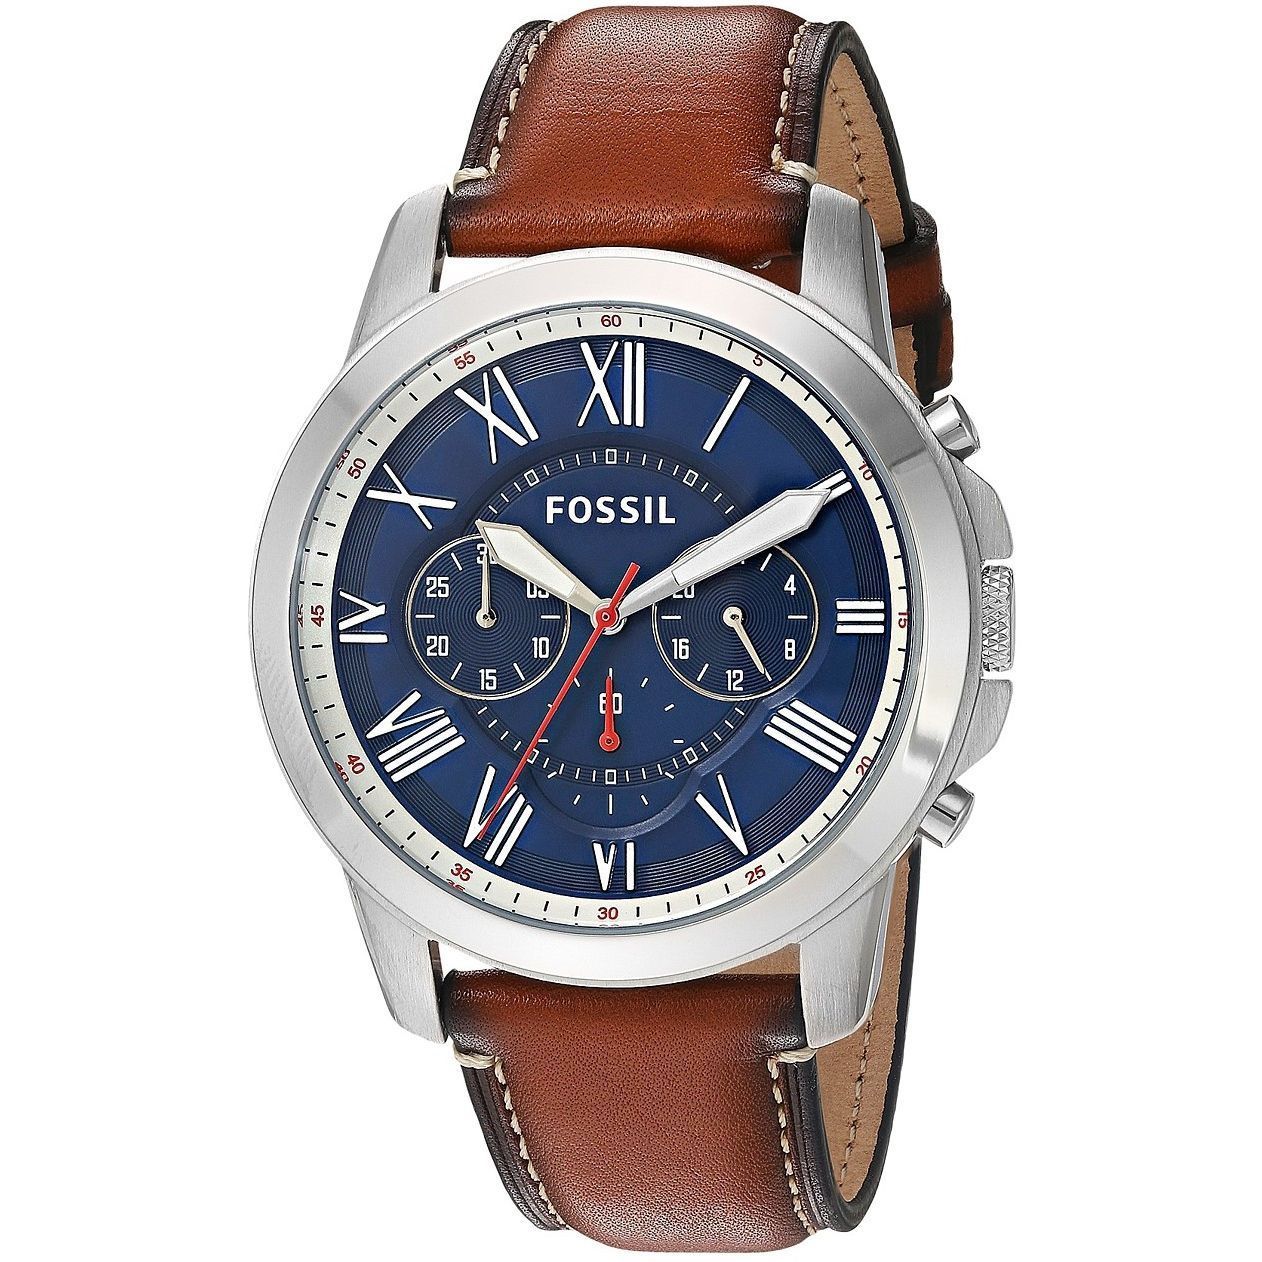 fossil grant chronograph automatic men's watch